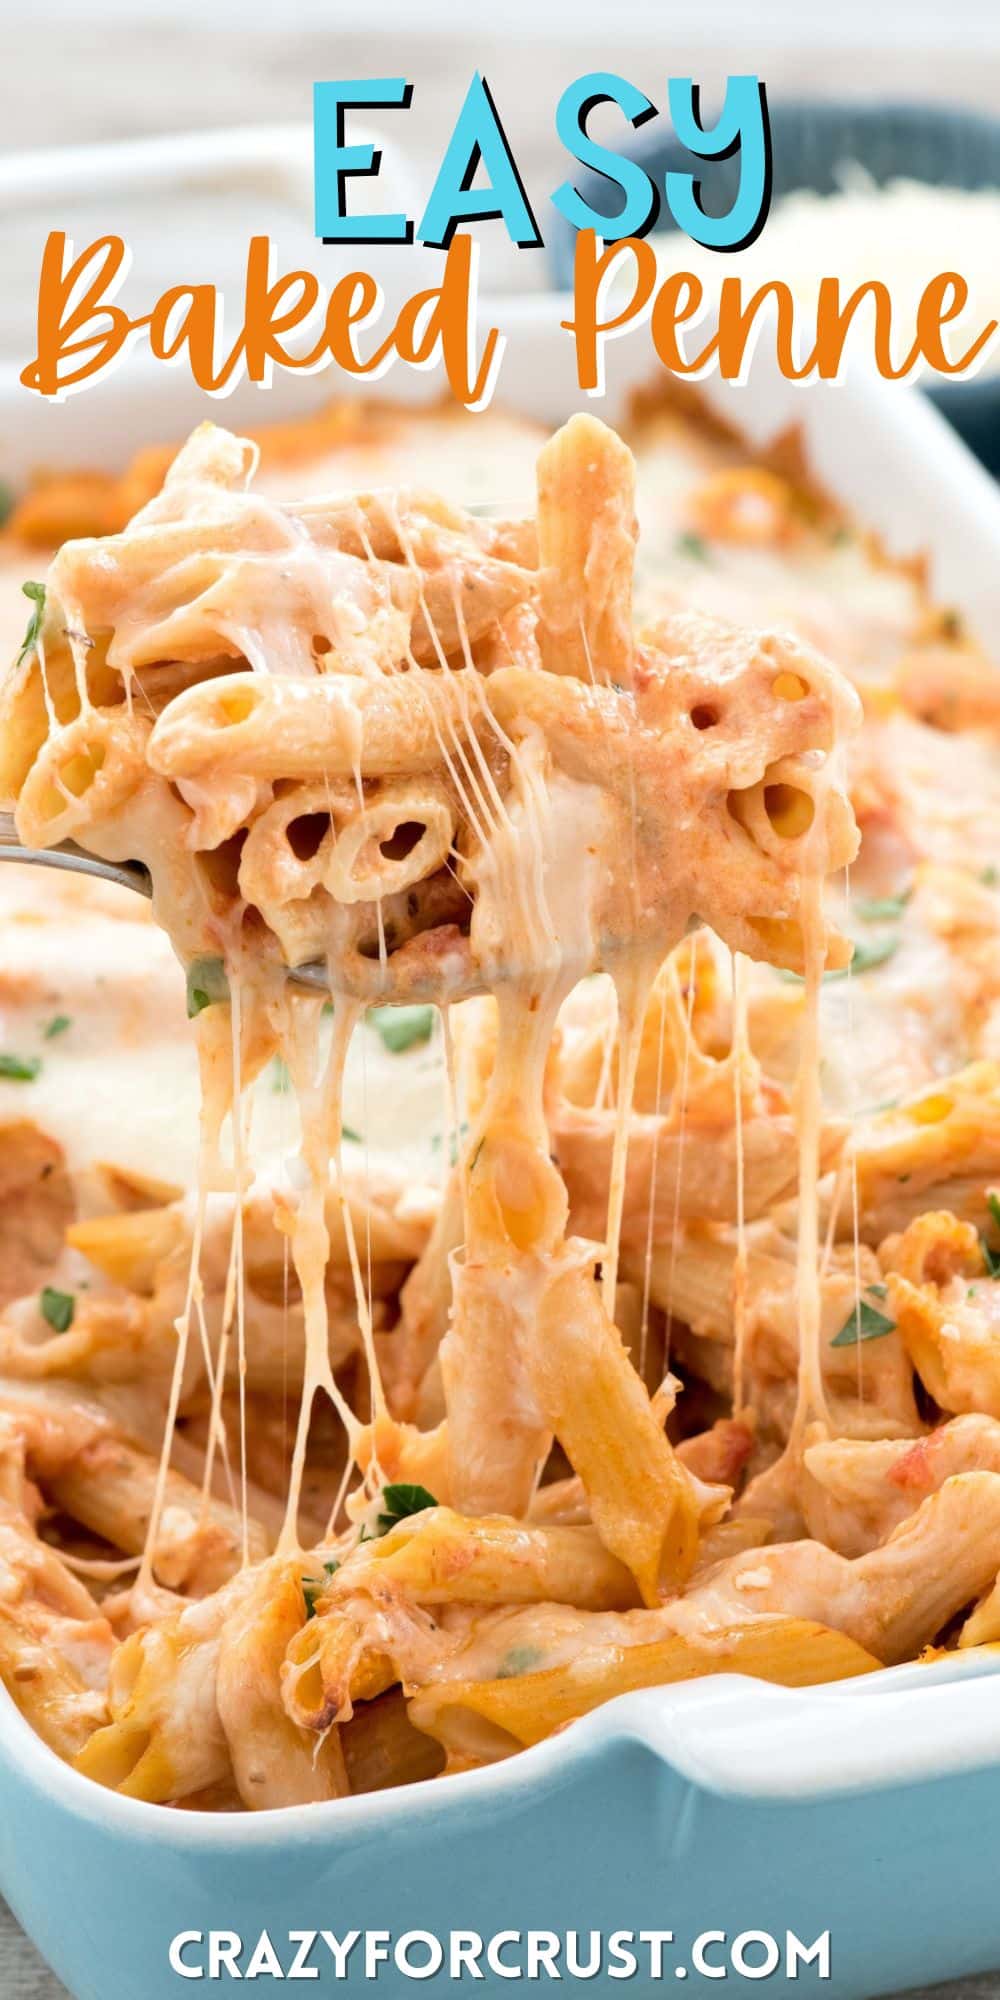 baked penne being scooped out of a teal pan with a silver spoon with words on the image.